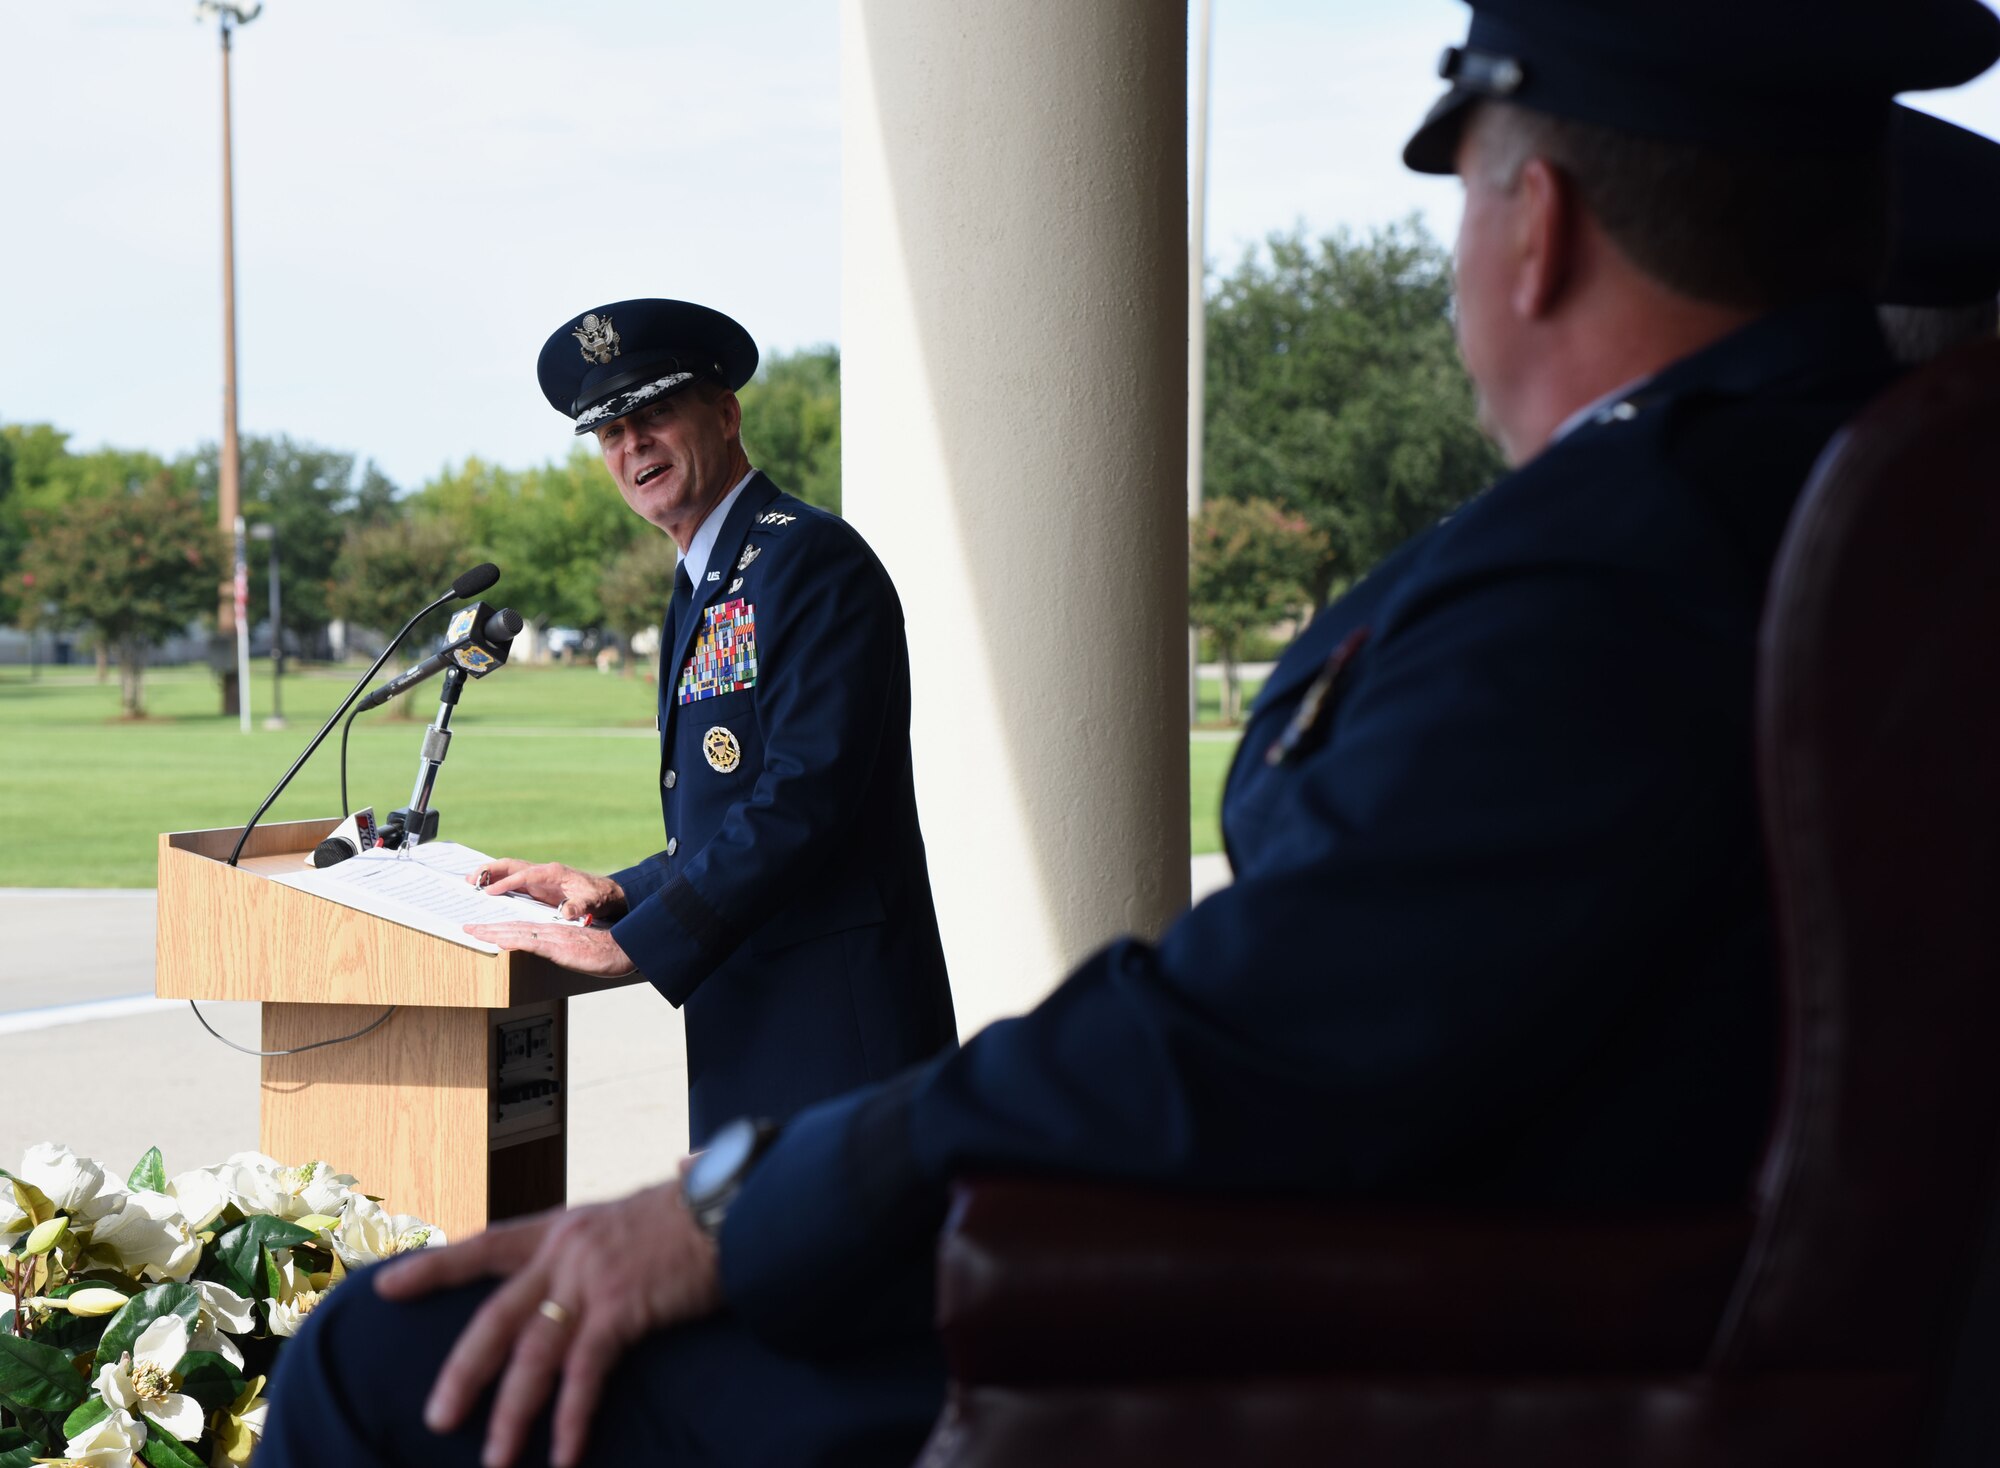 Lt. Gen. Darryl Roberson, commander of Air Education and Training Command, delivers remarks during the 2nd Air Force change of command ceremony at the Levitow Training Support Facility Aug. 23, 2017, on Keesler Air Force Base, Miss. Maj. Gen. Timothy Leahy took command of 2nd Air Force from Maj. Gen. Bob LaBrutta.  Leahy comes to Keesler from Air University at Maxwell AFB, Ala. (U.S. Air Force photo by Kemberly Groue)